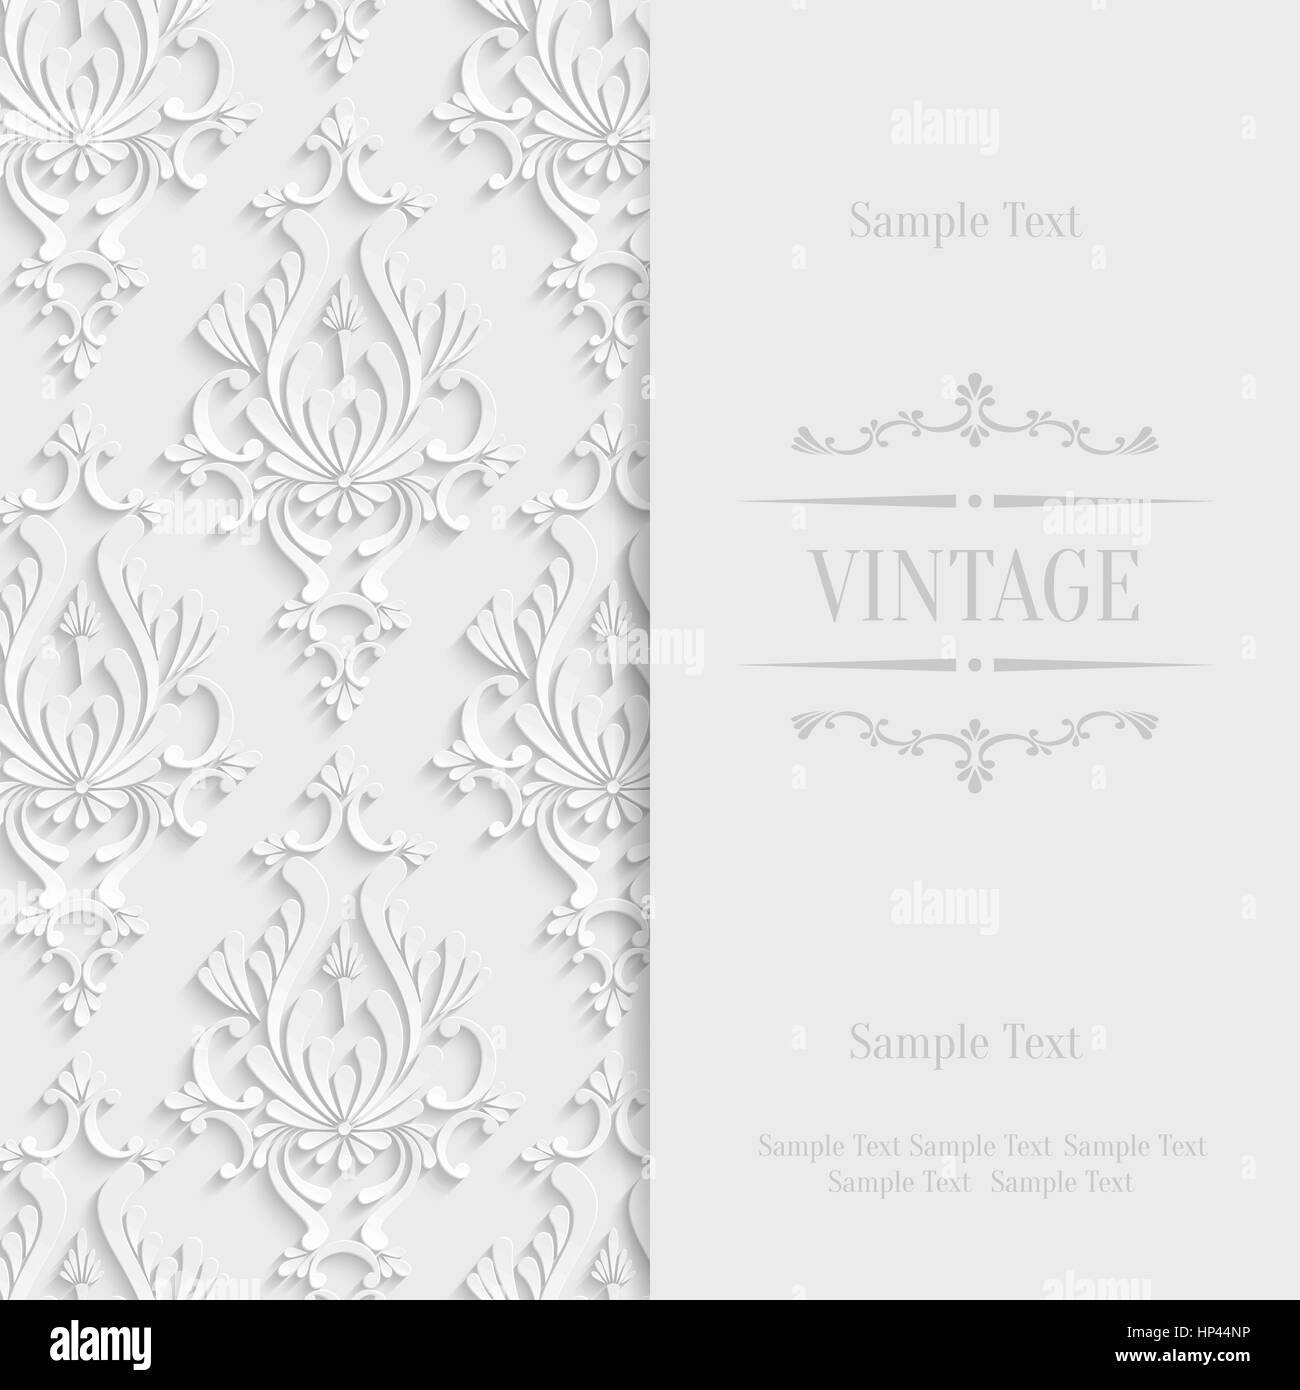 Vector White Vintage Background with 3d Floral Damask Pattern for Wedding or Invitation Card Stock Vector